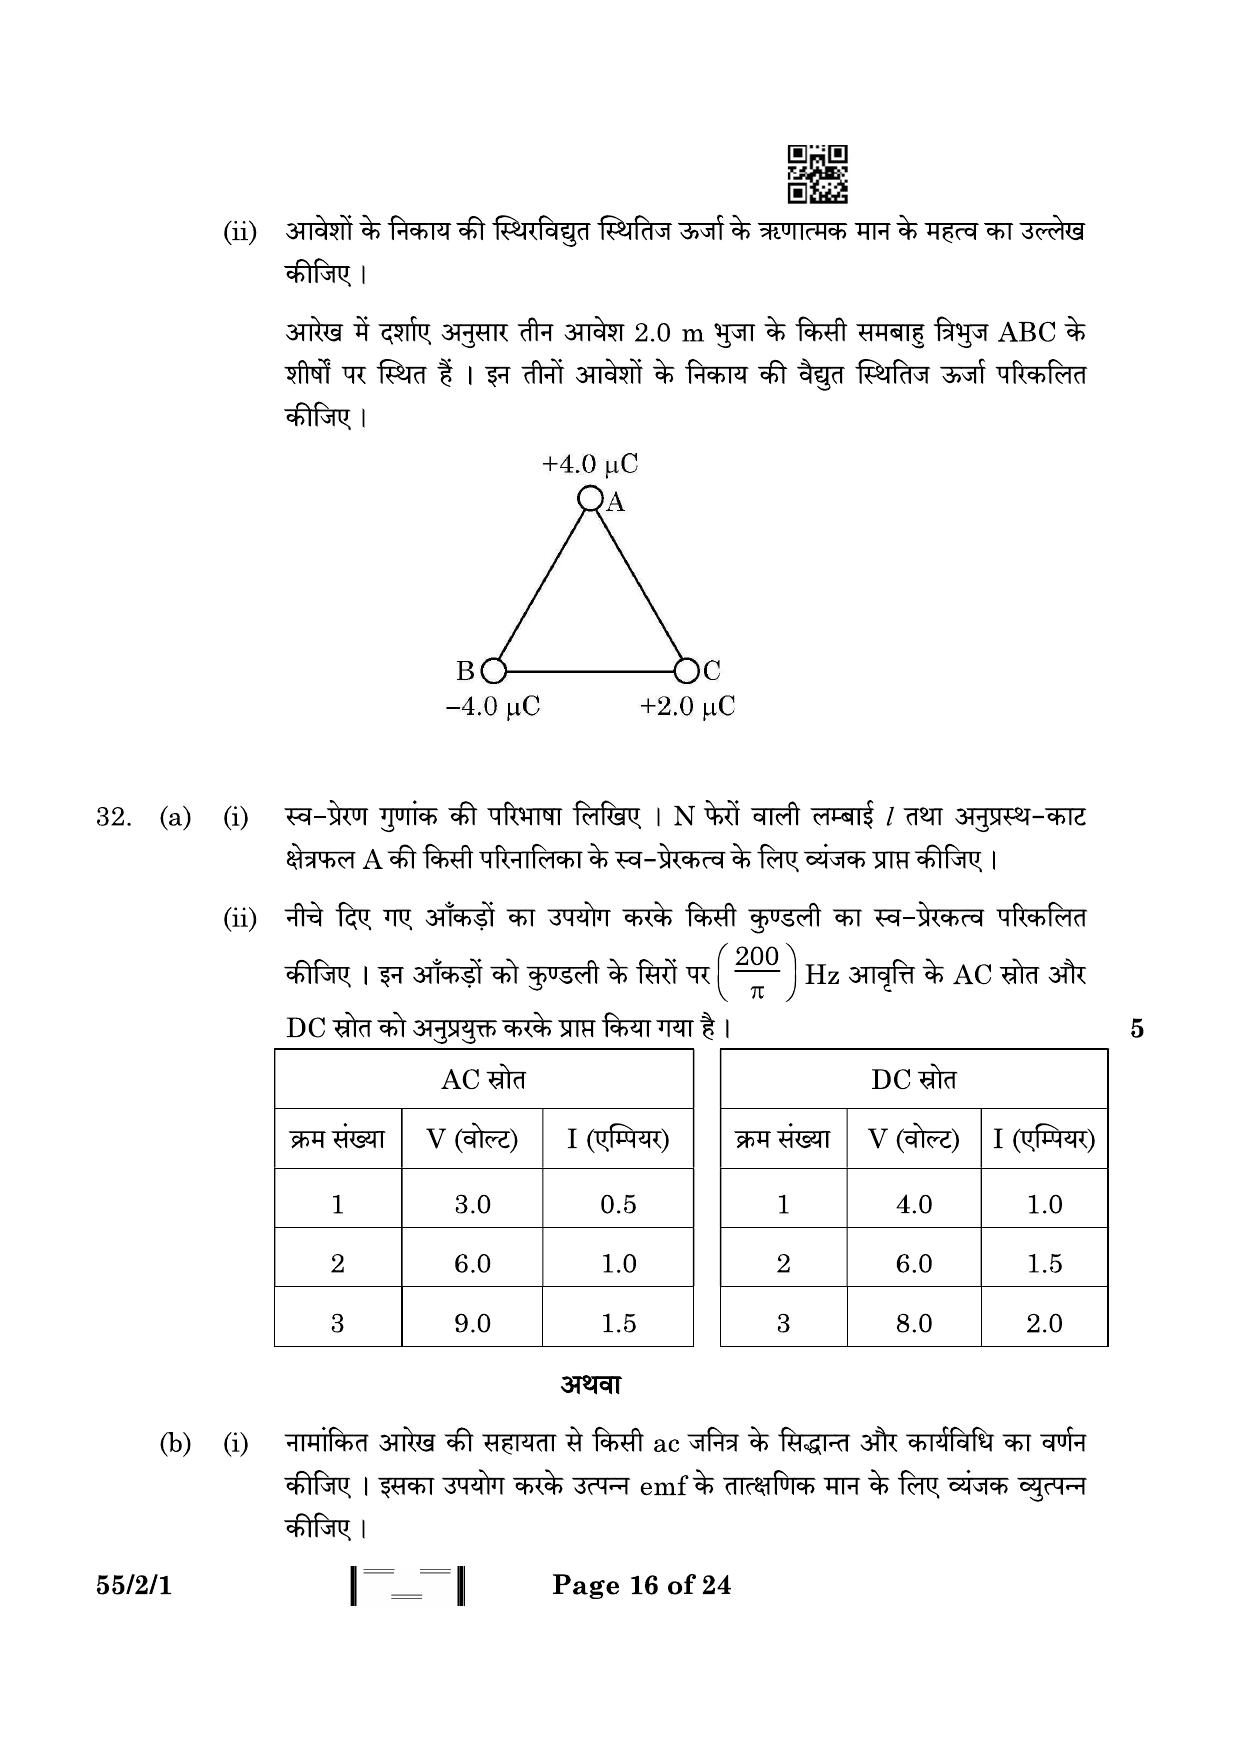 CBSE Class 12 55-2-1 Physics 2023 Question Paper - Page 16